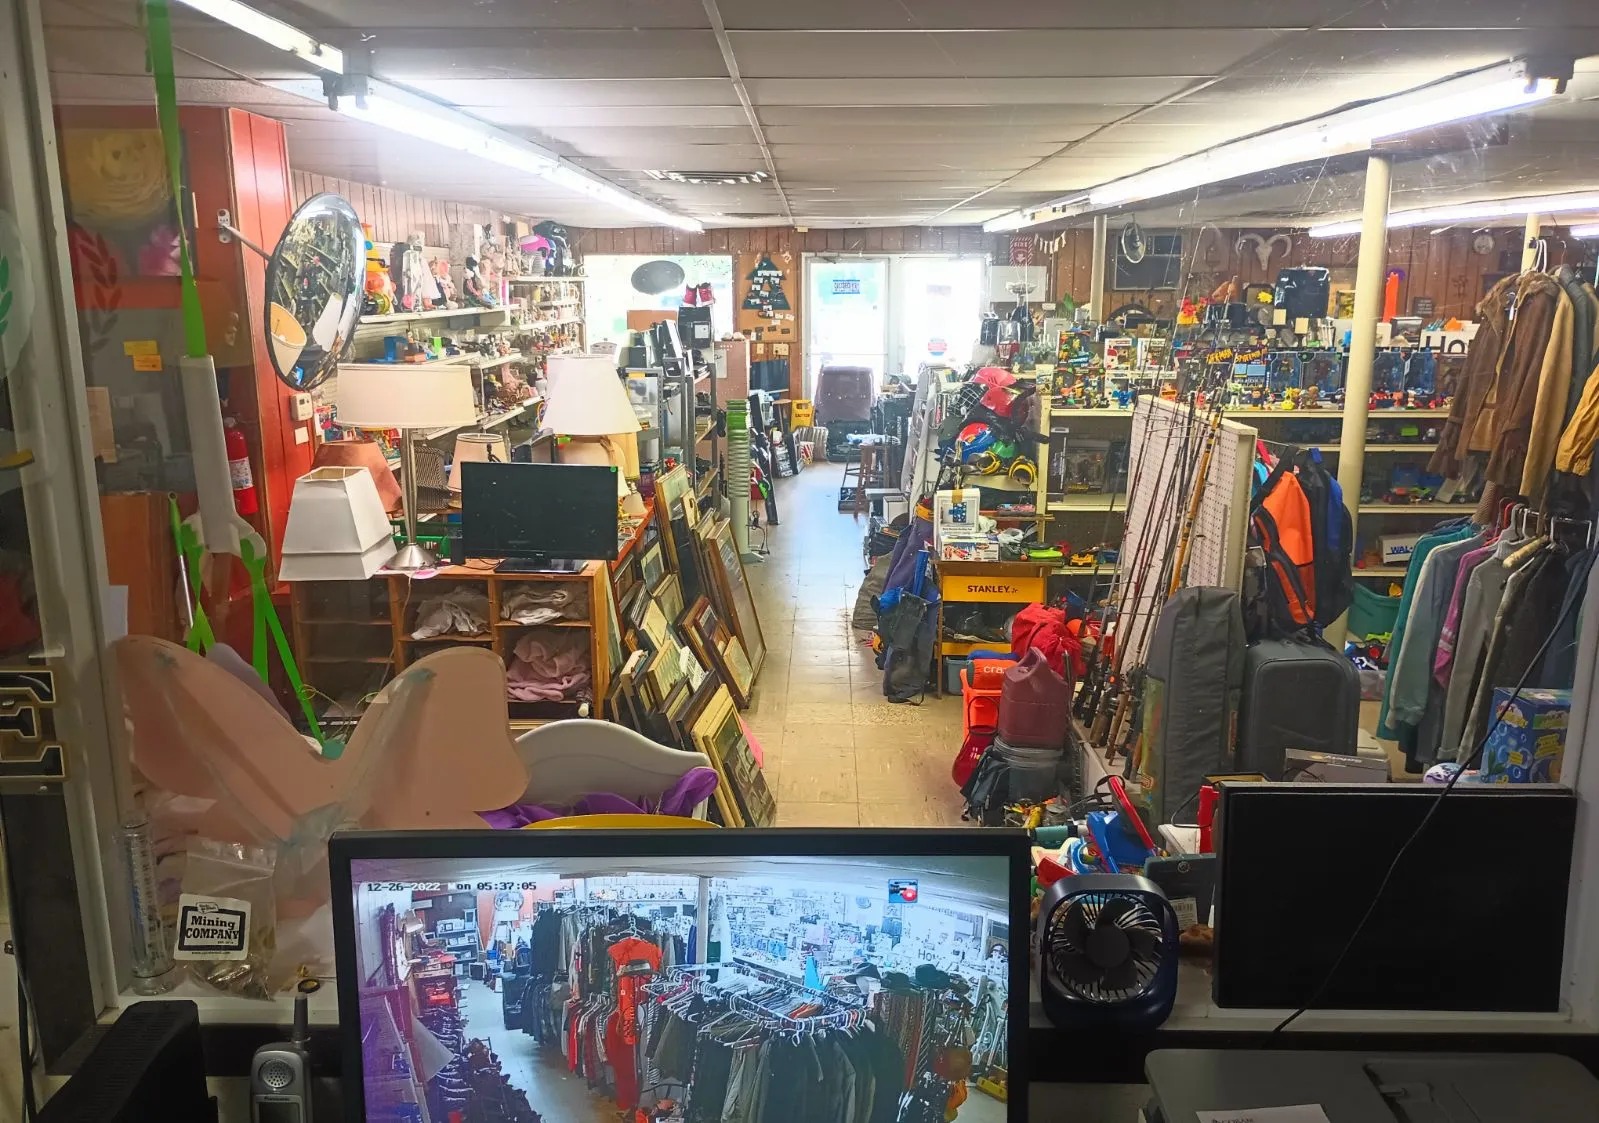 A view of the diverse and well-organized interior of Thrifty Treasures thrift store in East Lansing, Michigan, showcasing a wide range of unique items and collectibles.